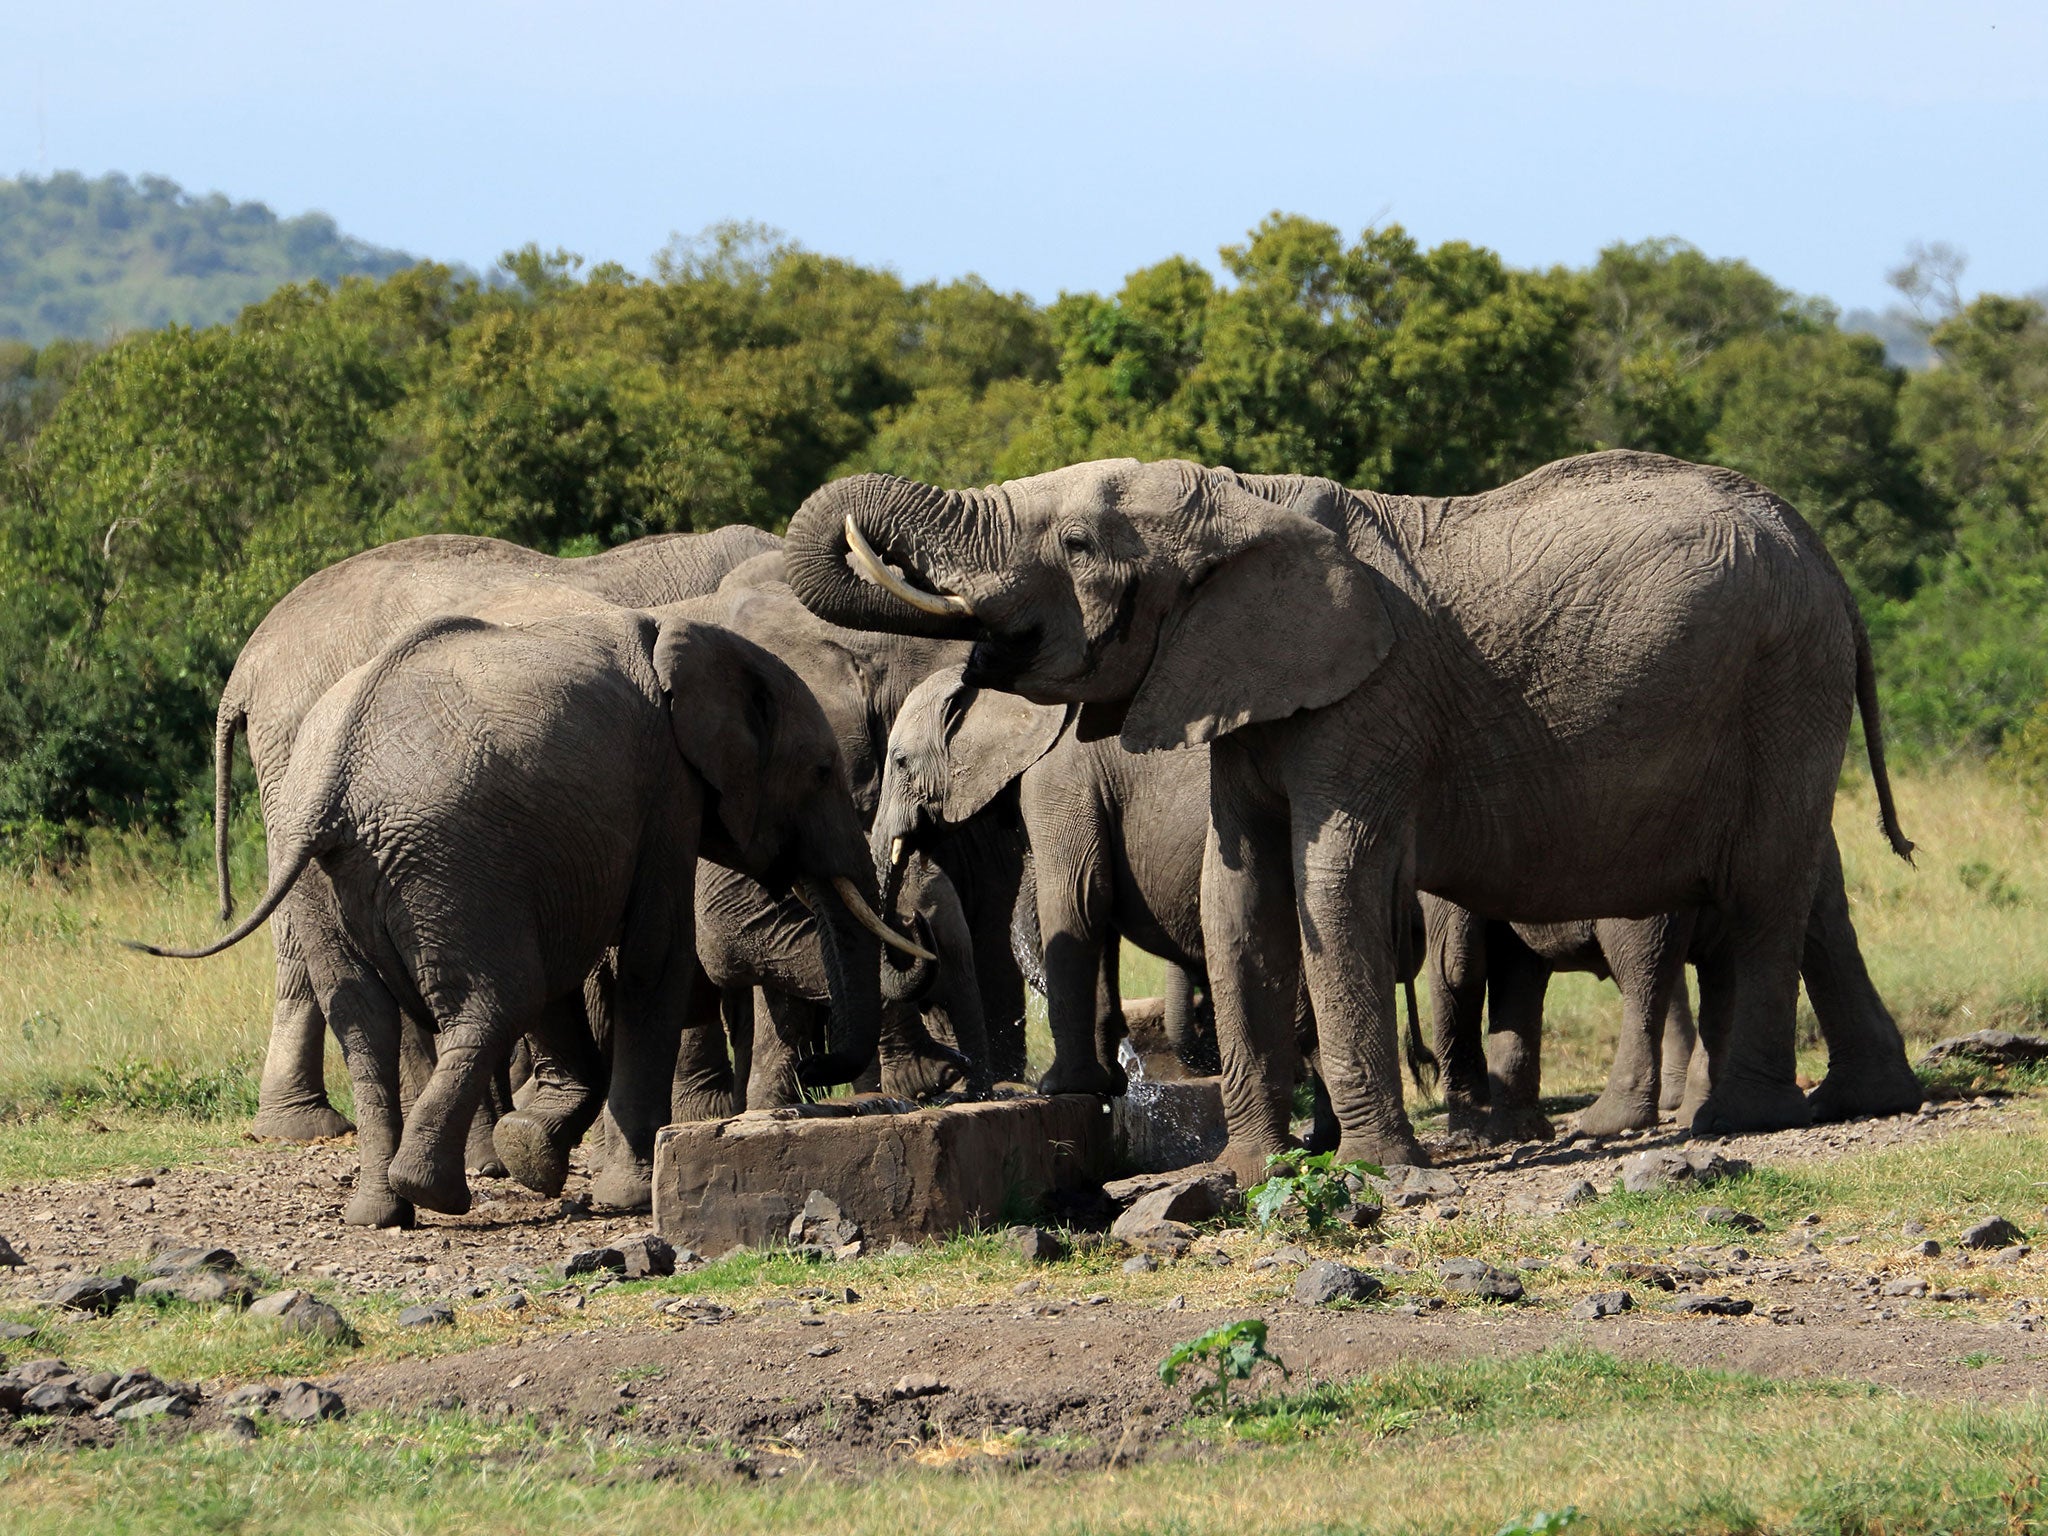 Elephants at a waterhole in Ol Pejeta Conservancy in Kenya. The country is stepping up efforts to reduce poaching and eradicate the illegal ivory trade